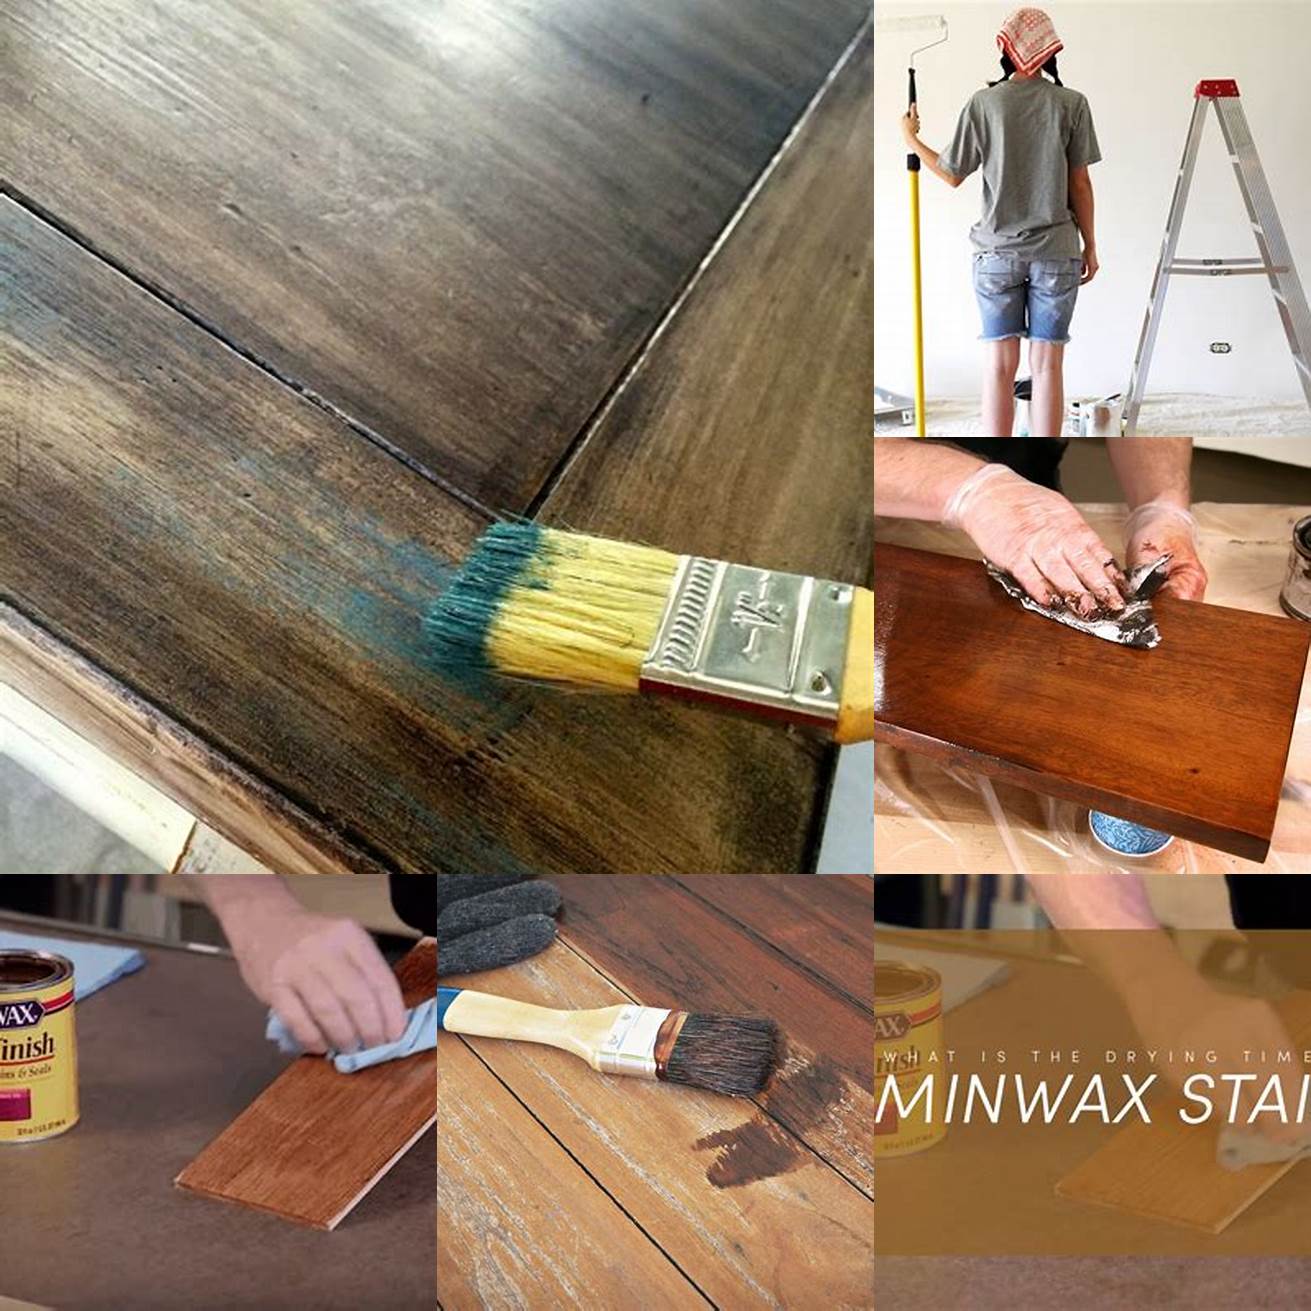 3 Allow the stain or paint to dry completely before using your new workspace